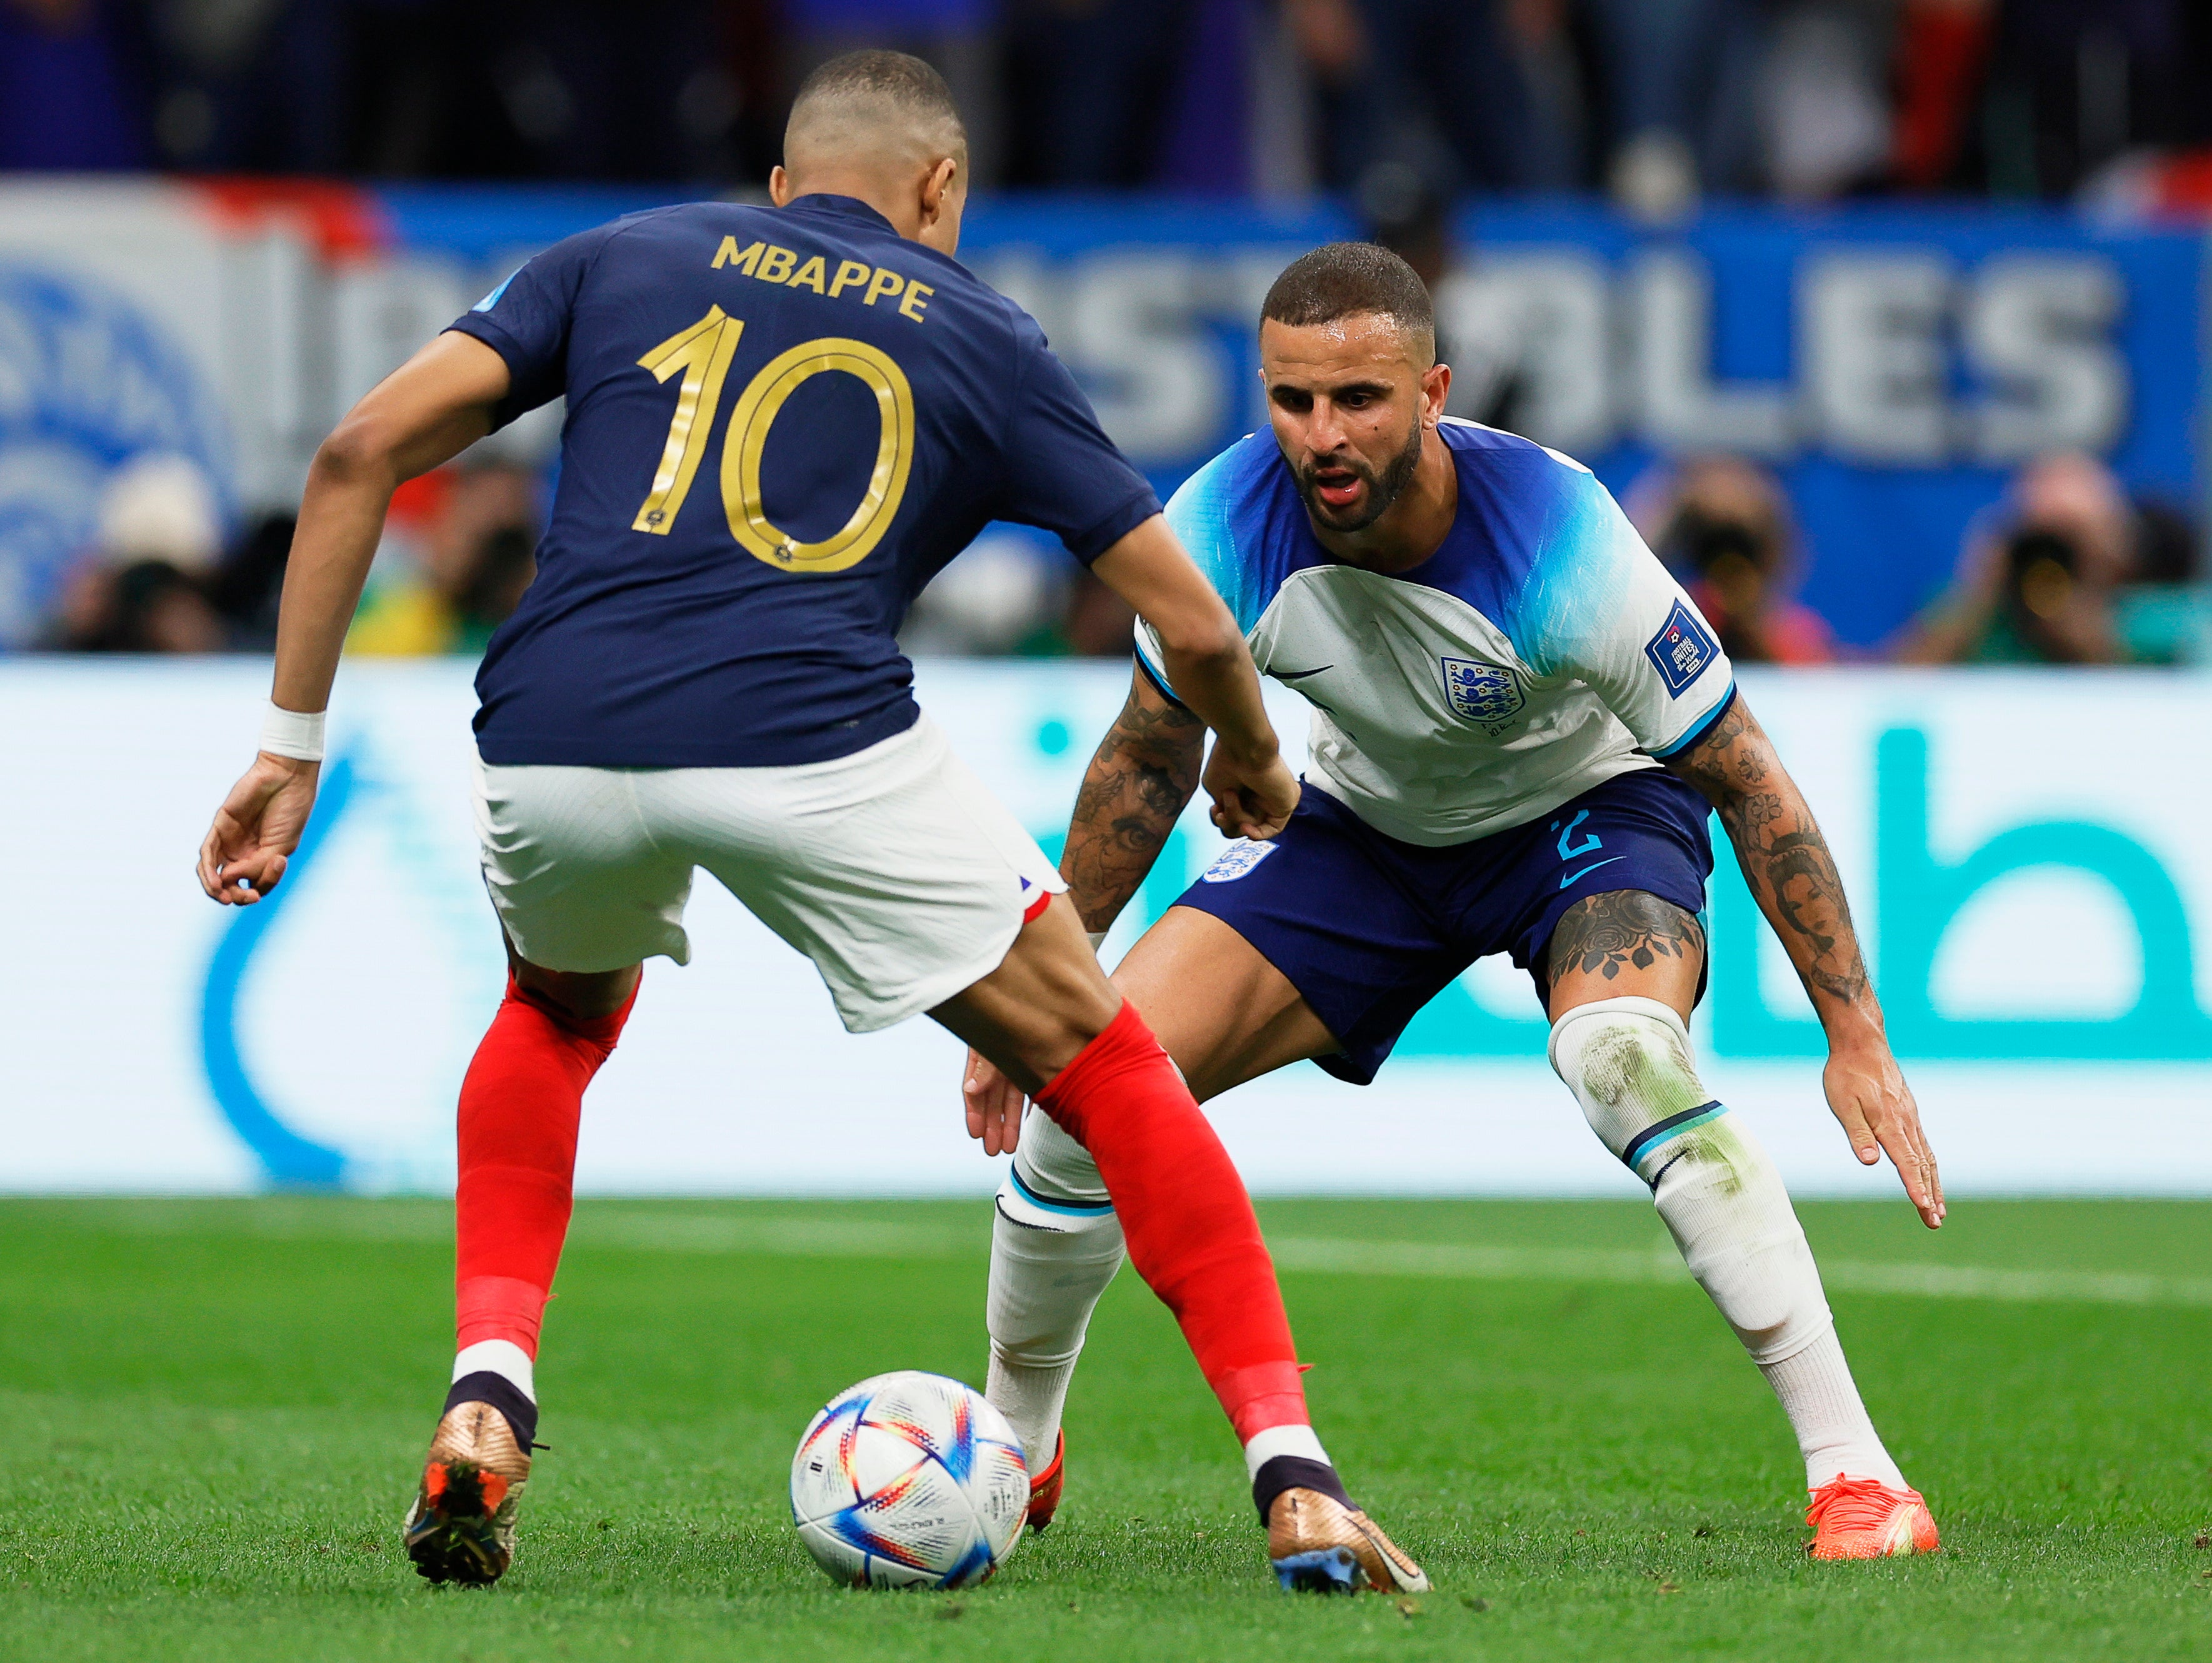 Mbappe against Walker was a compelling sub-plot in the England vs France quarter-final